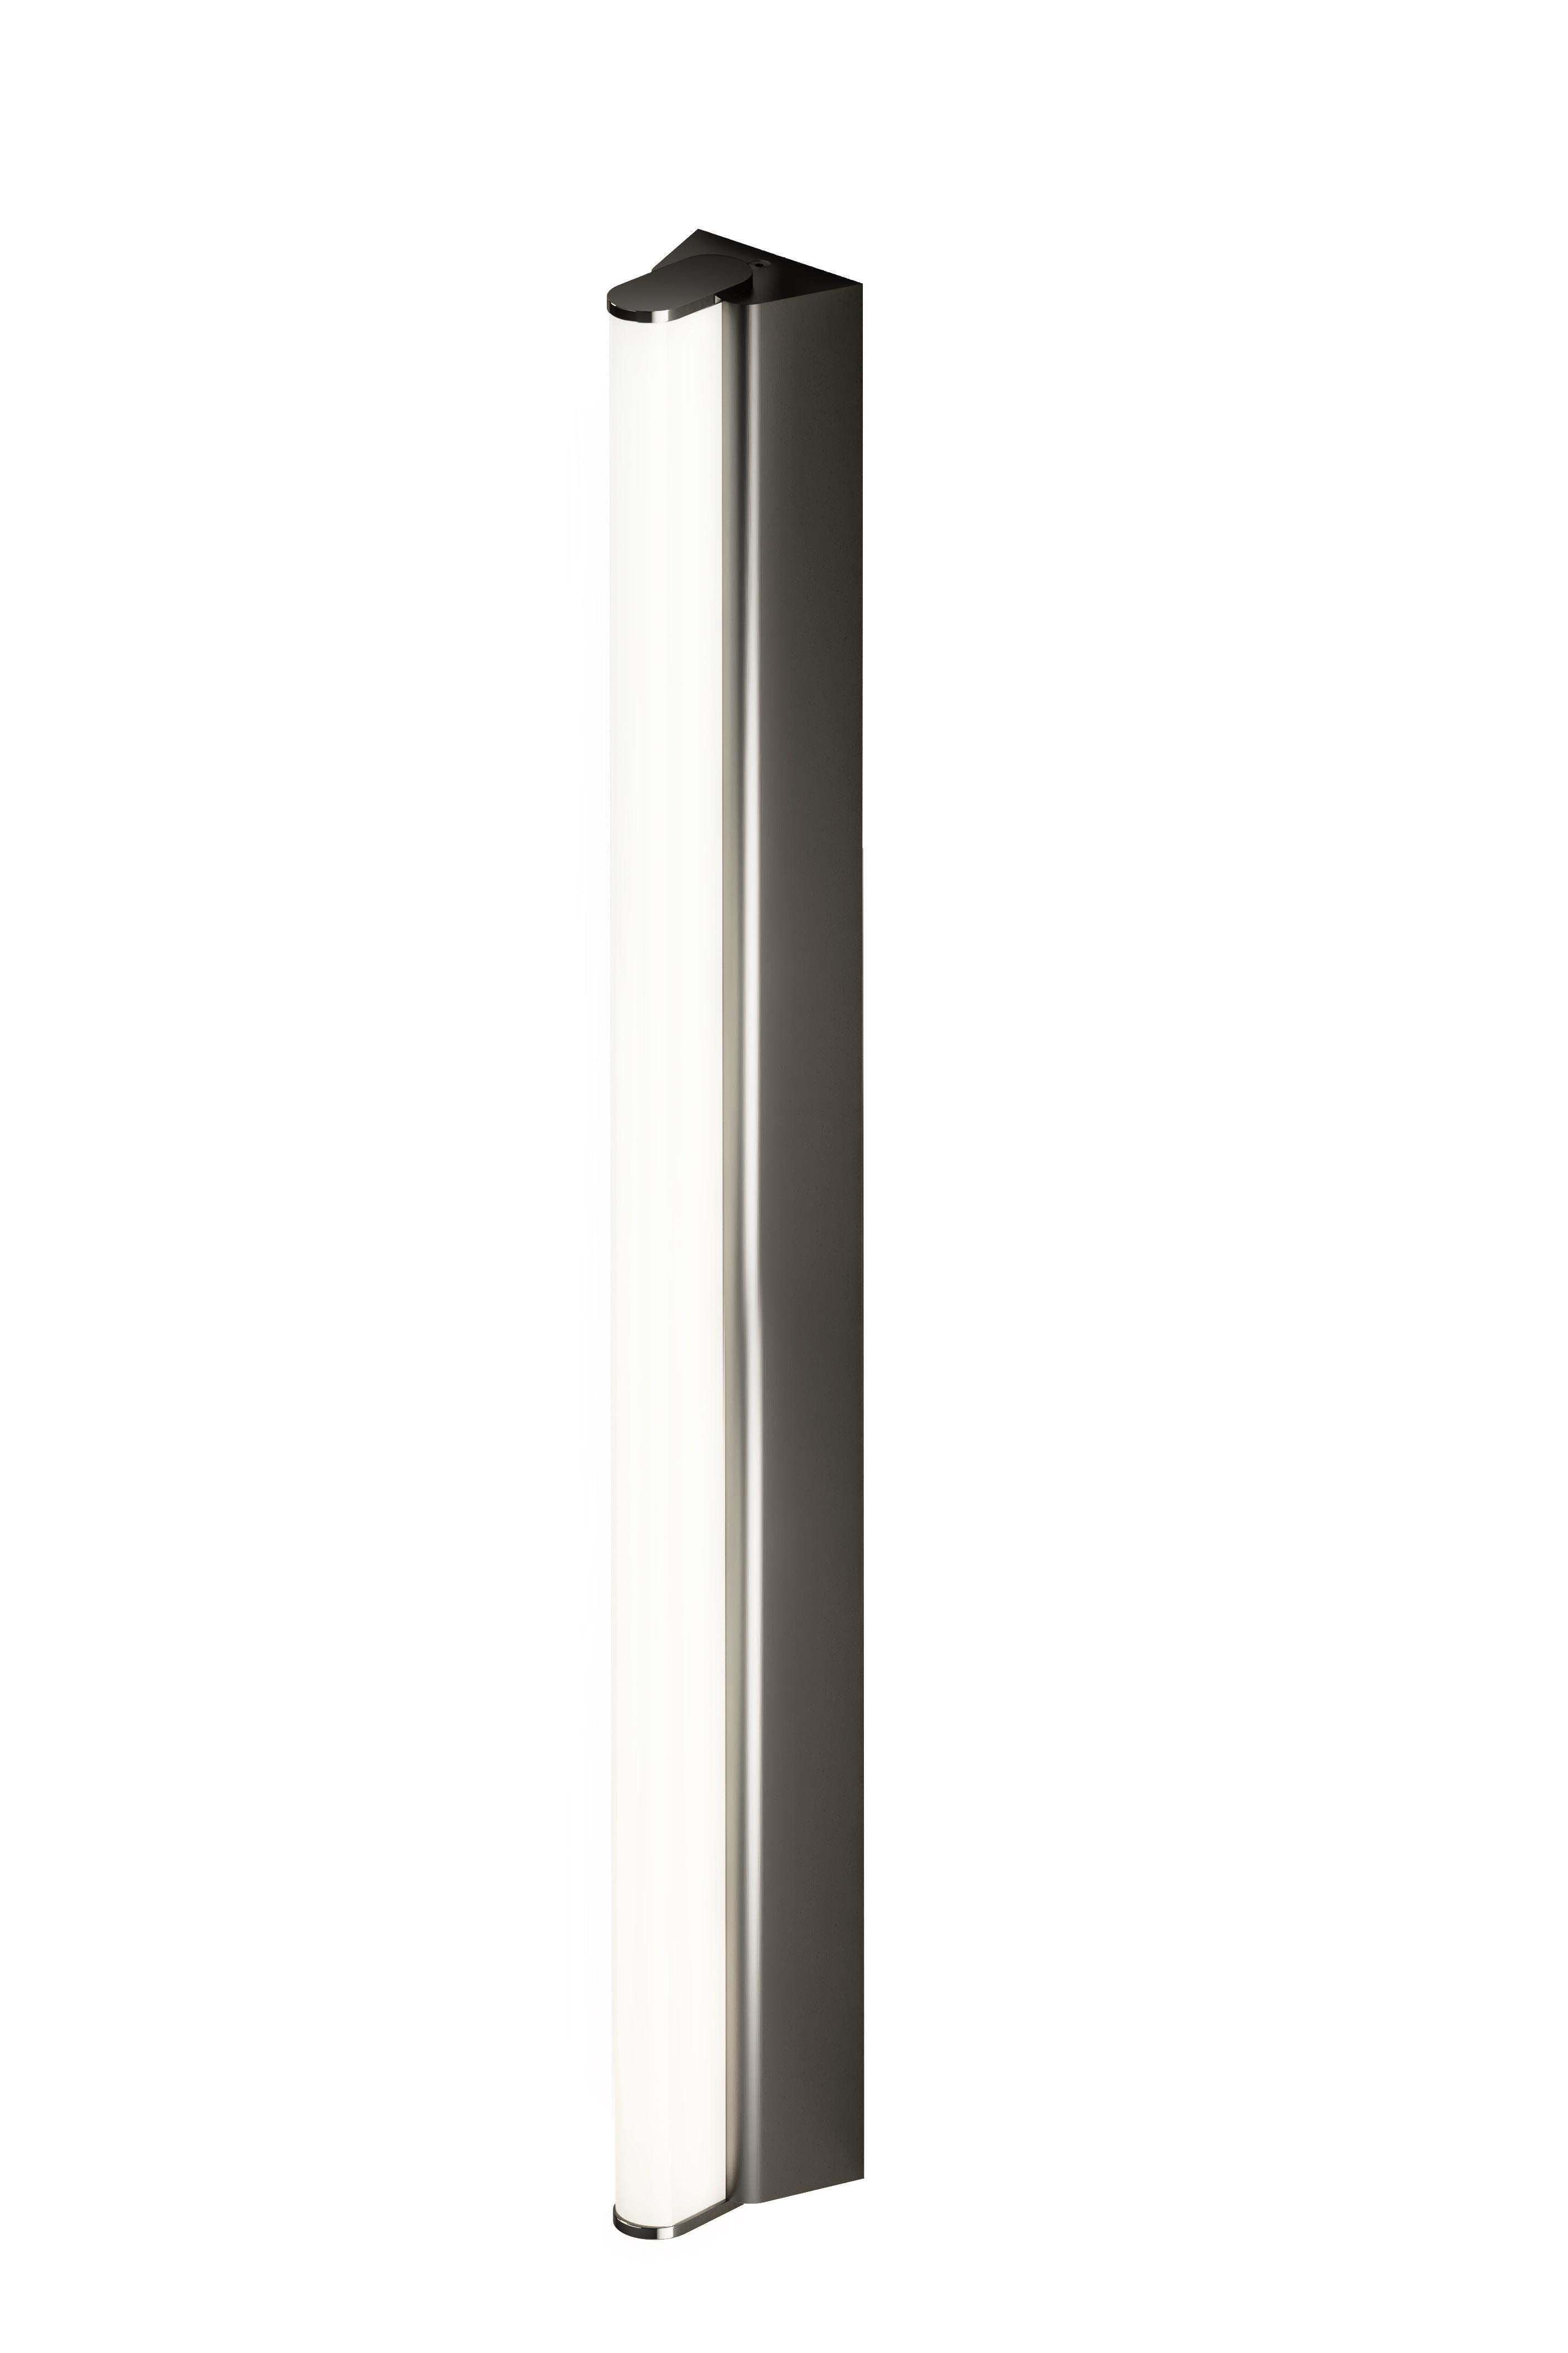 IP Metrop 525 Polished Graphite wall light by Emilie Cathelineau
Dimensions: D52.5 x W5 X H4.5 cm
Materials: Solid brass, Polished Graphite, LED, Polycarbonate.
Others finishes and dimensions are available.

All our lamps can be wired according